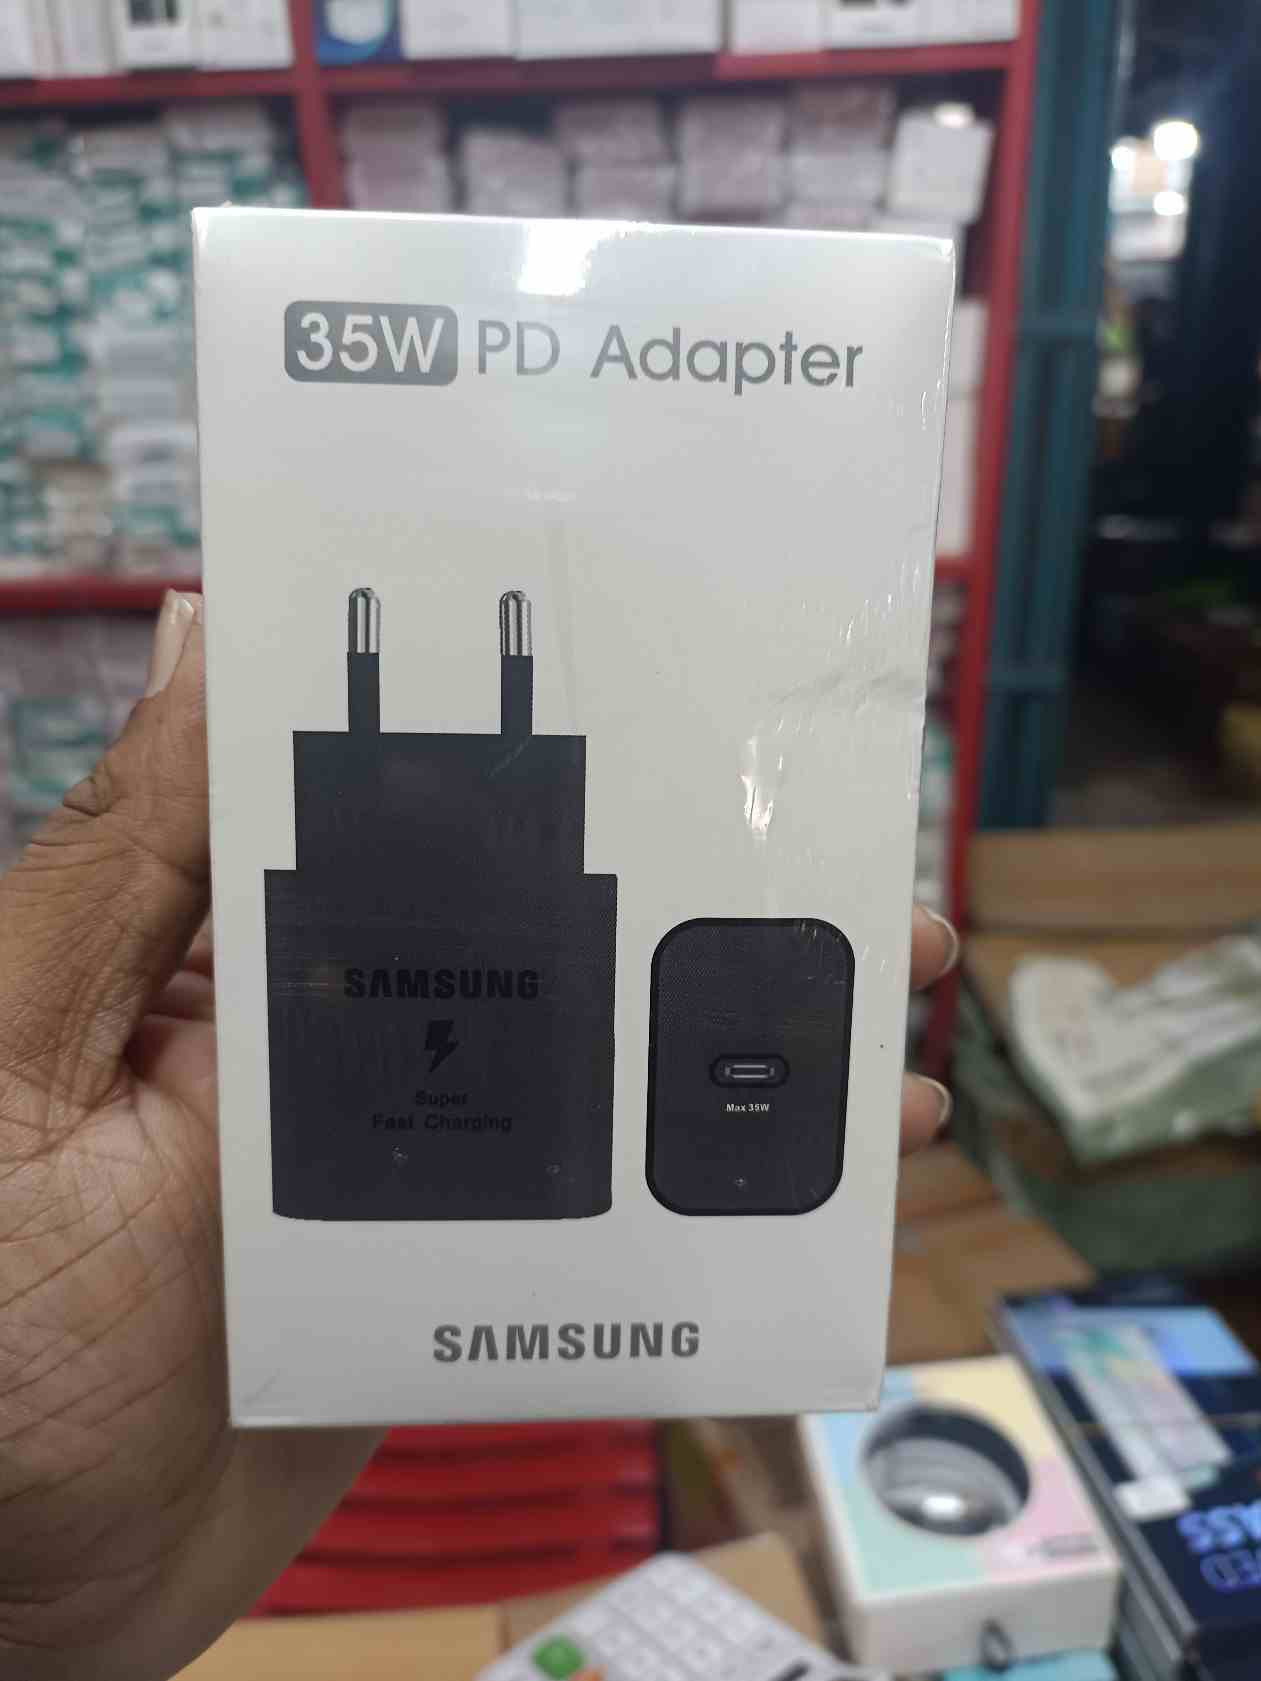 Samsung Charging 35W PD Adapter High Quality BD